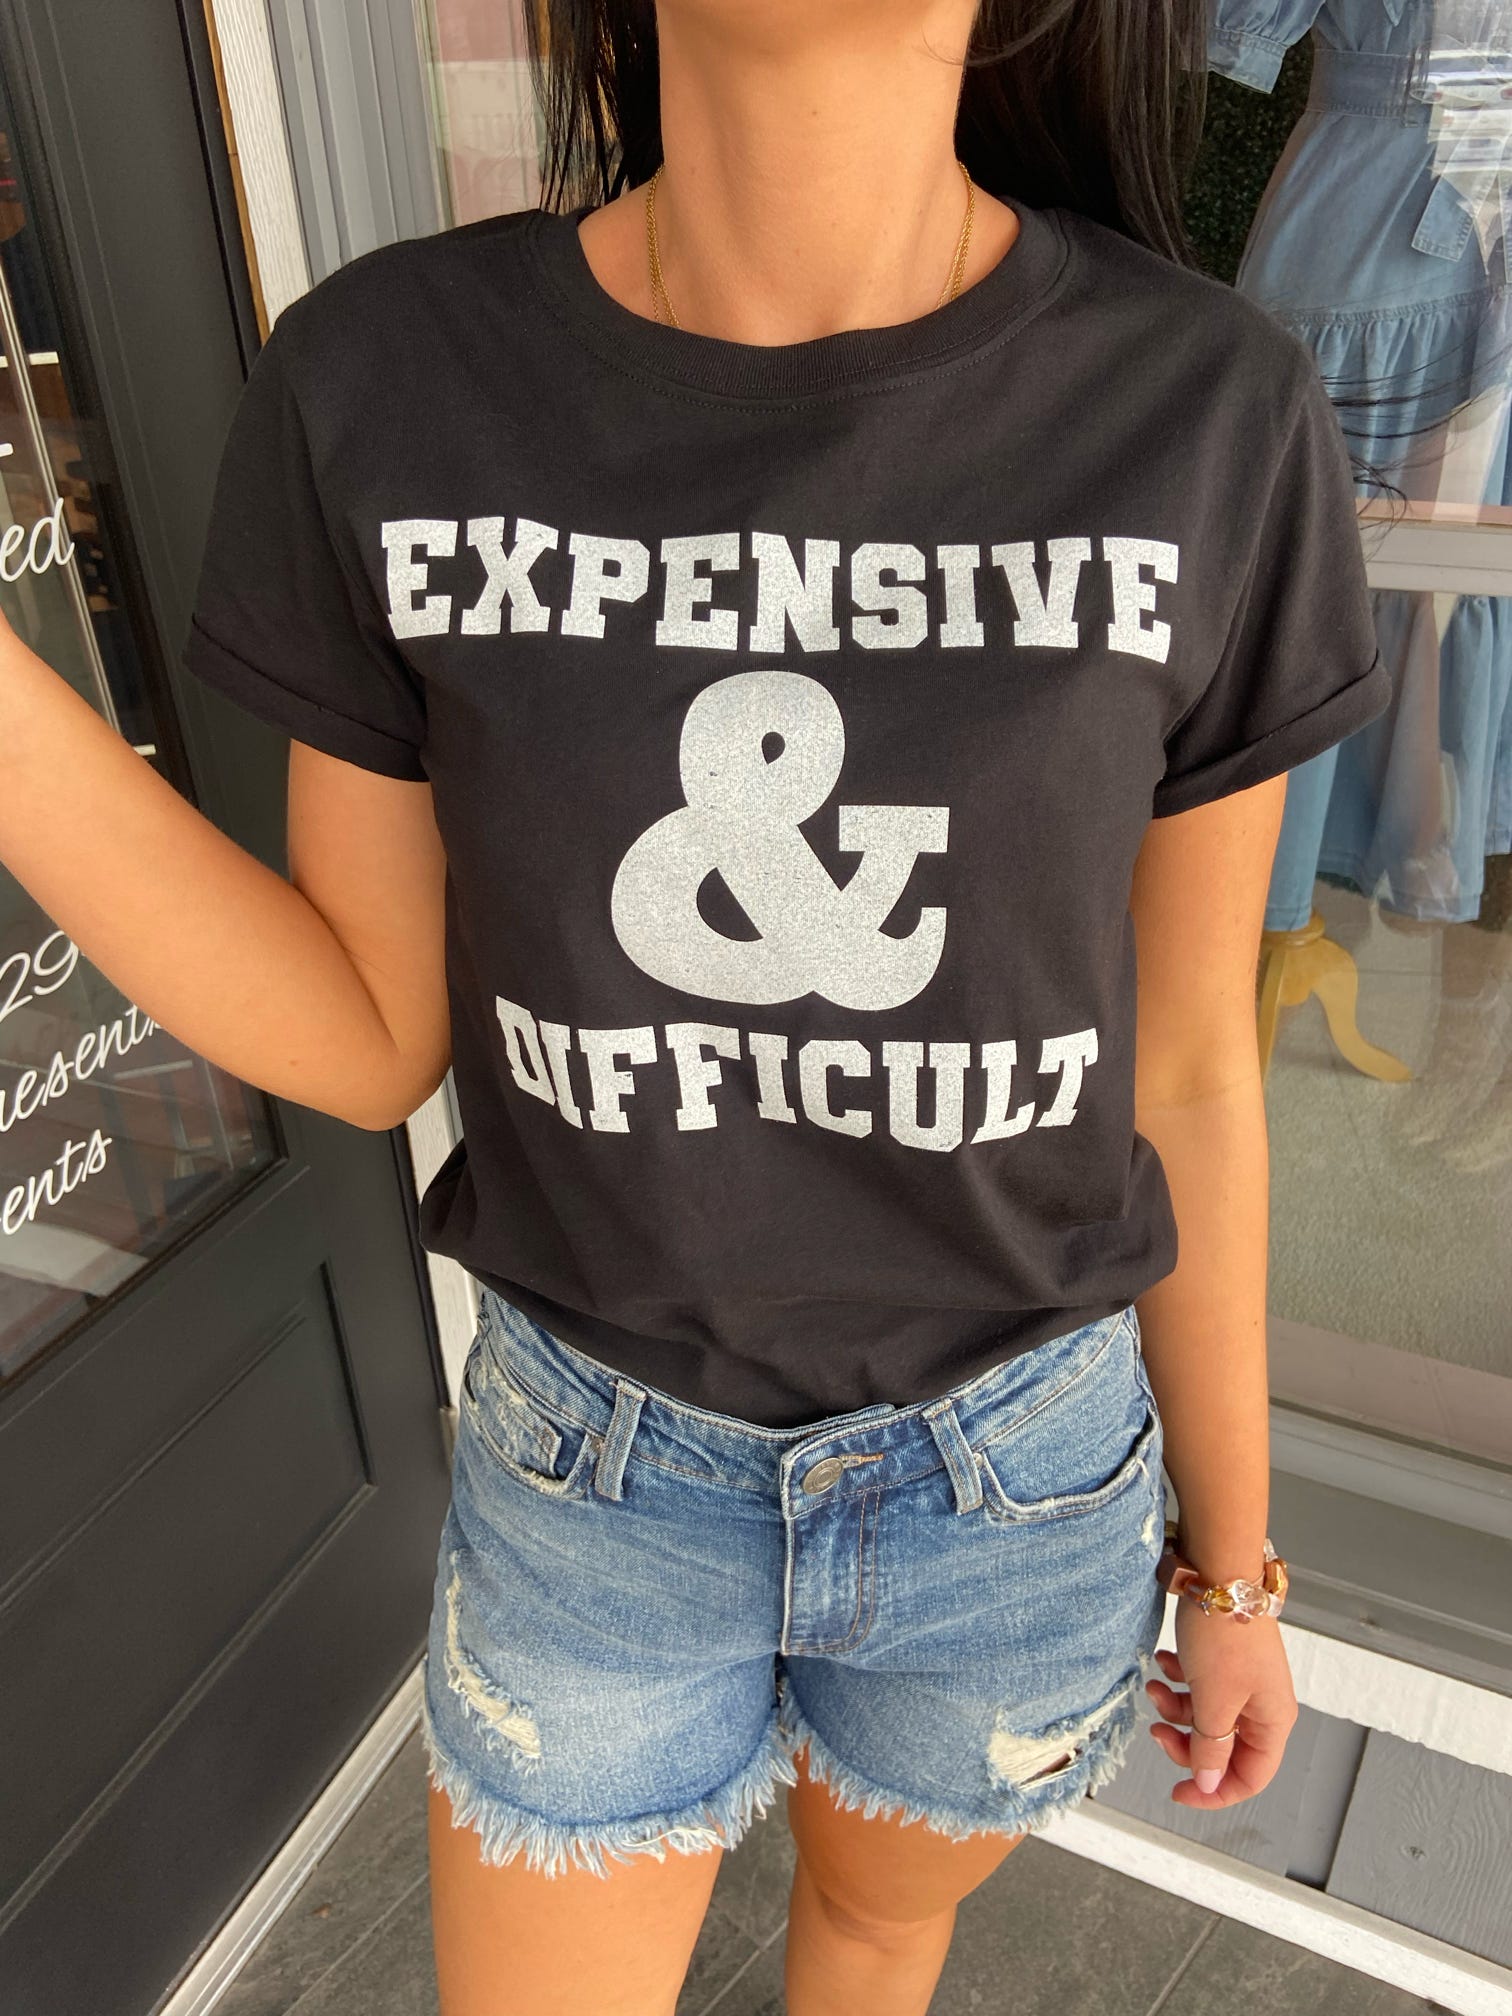 "Expensive & Difficult" Tee